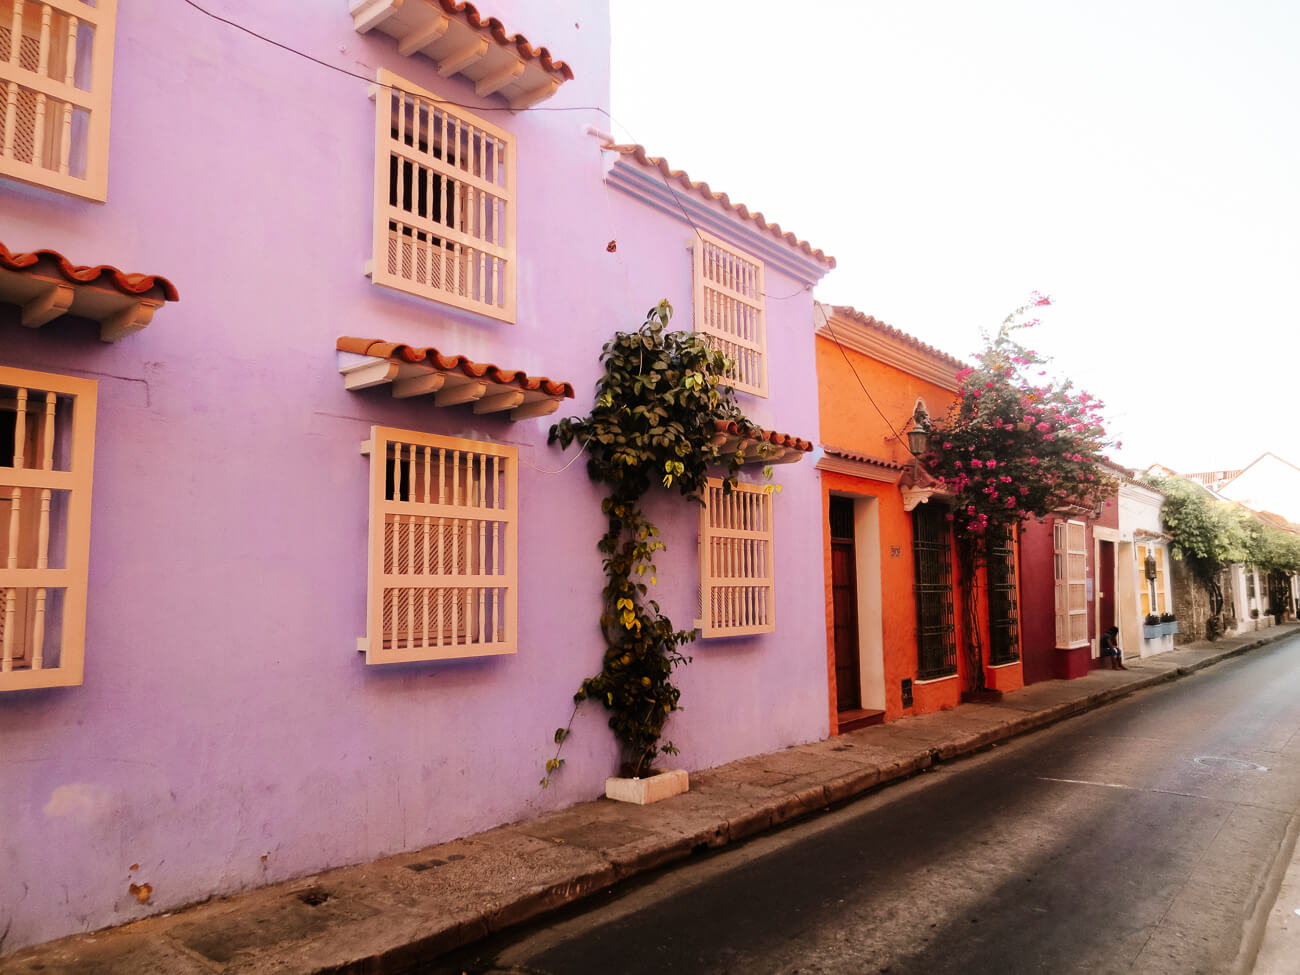 Cartagena, one of the beautiful places to visit in Colombia